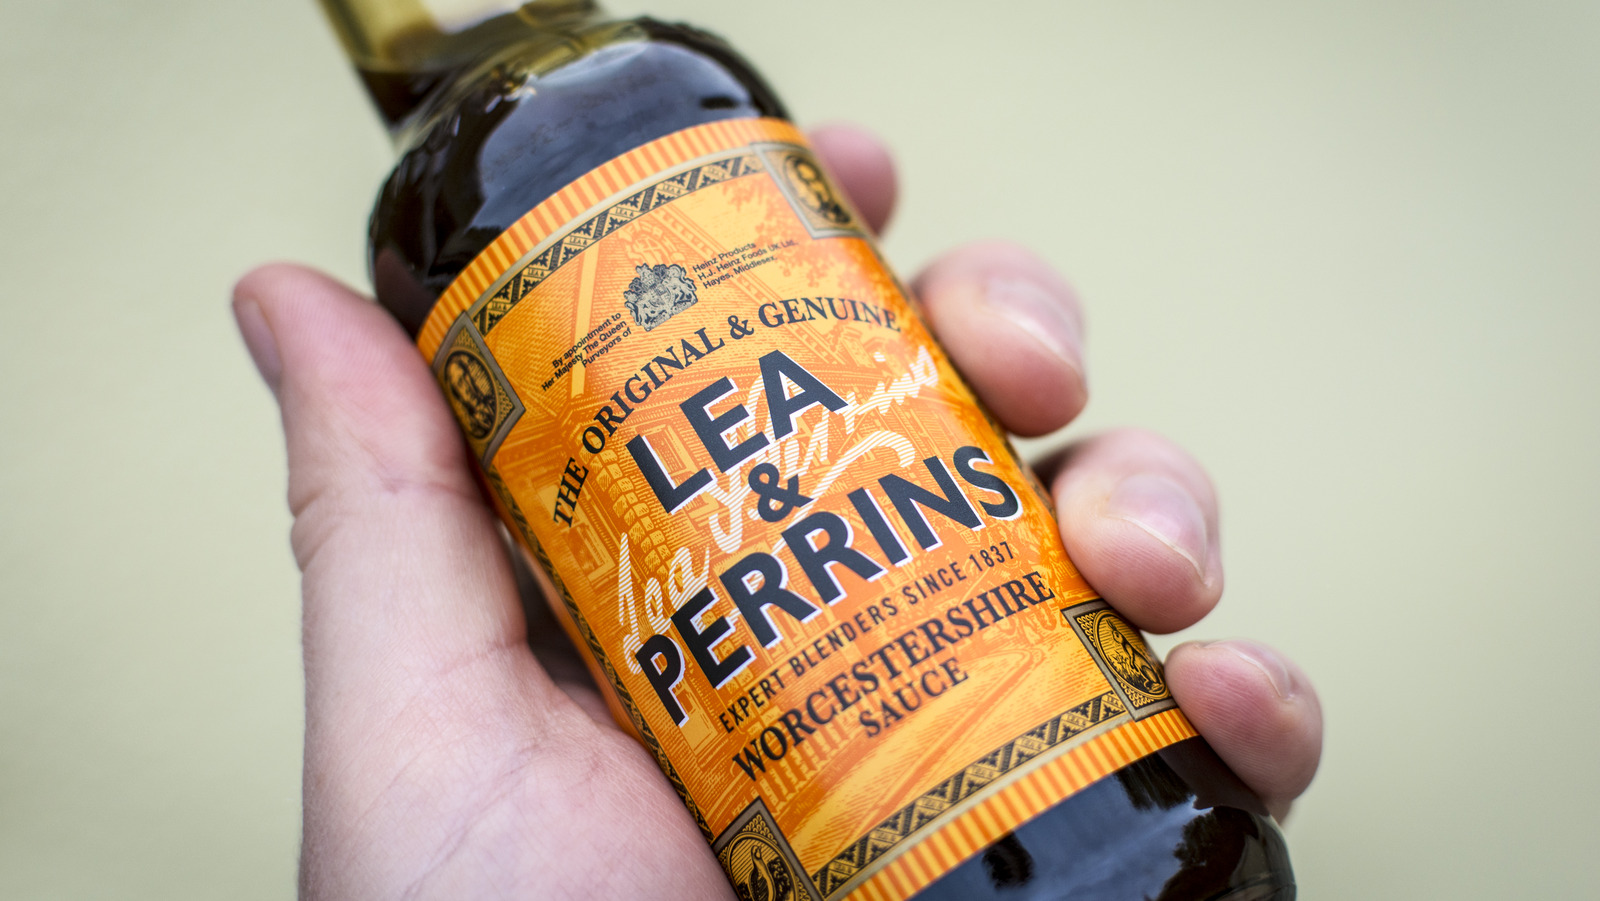 What Exactly IS Worcestershire Sauce, Anyway?